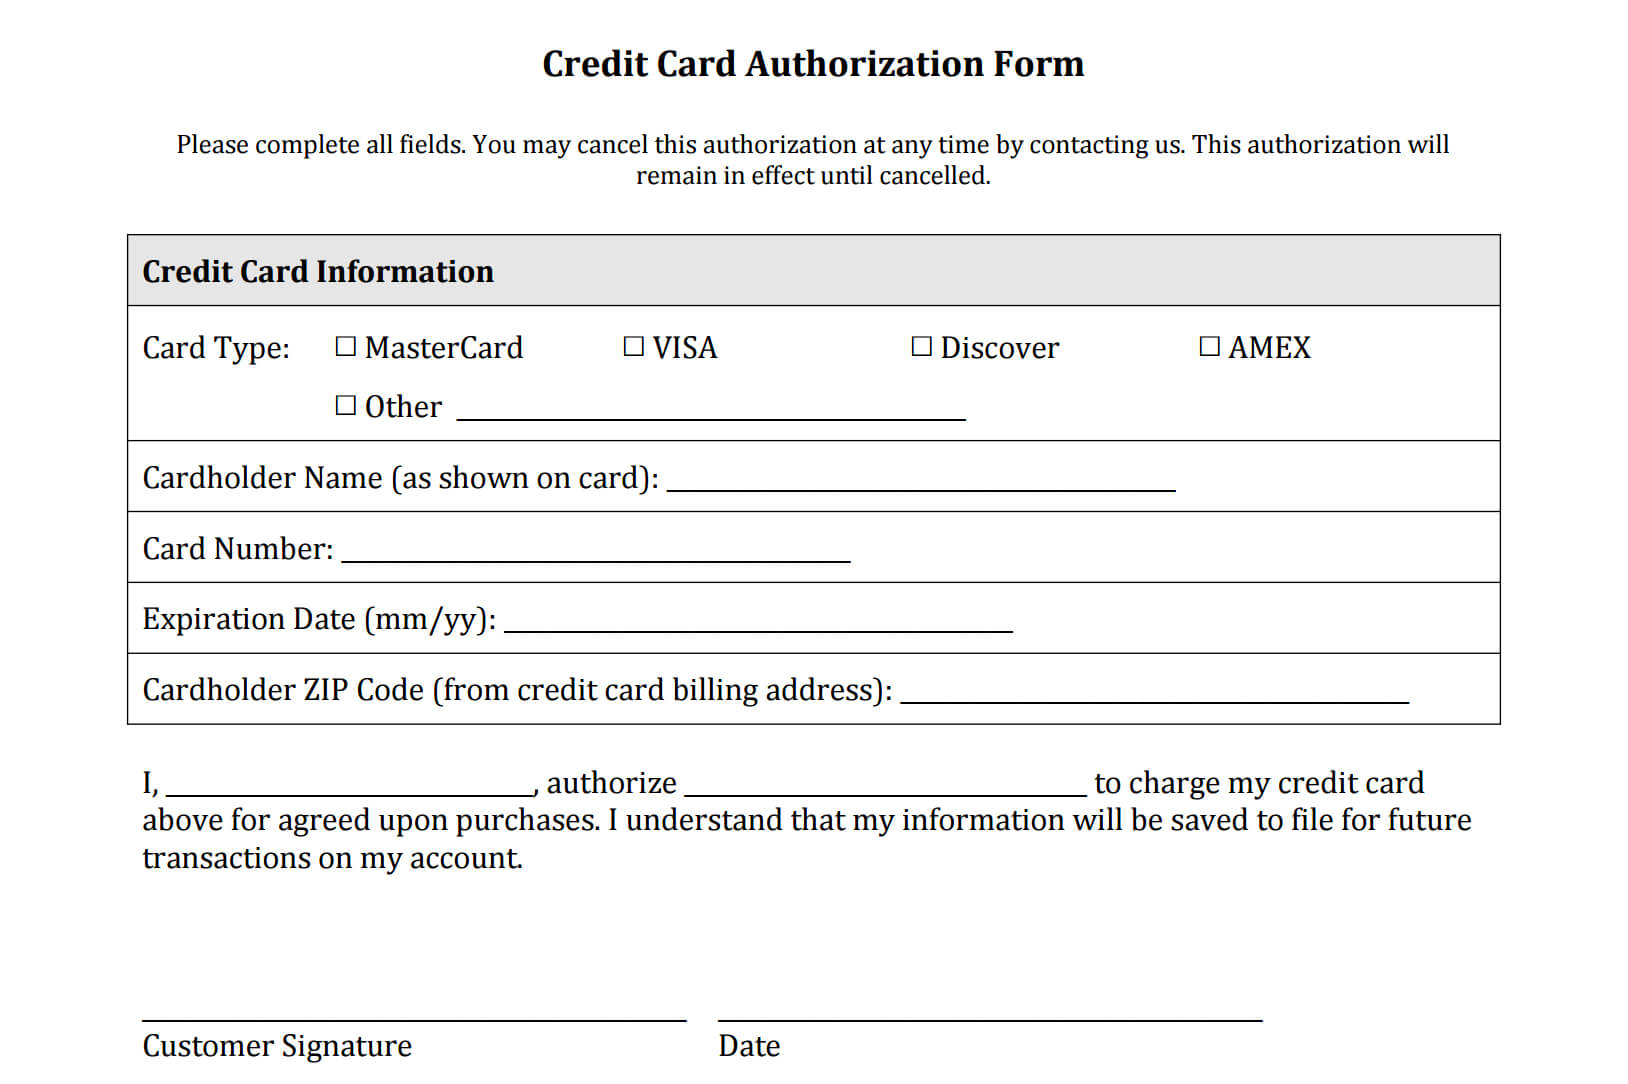 Credit Authorization Form | Types Of Credit Cards, Credit Inside Credit Card On File Form Templates